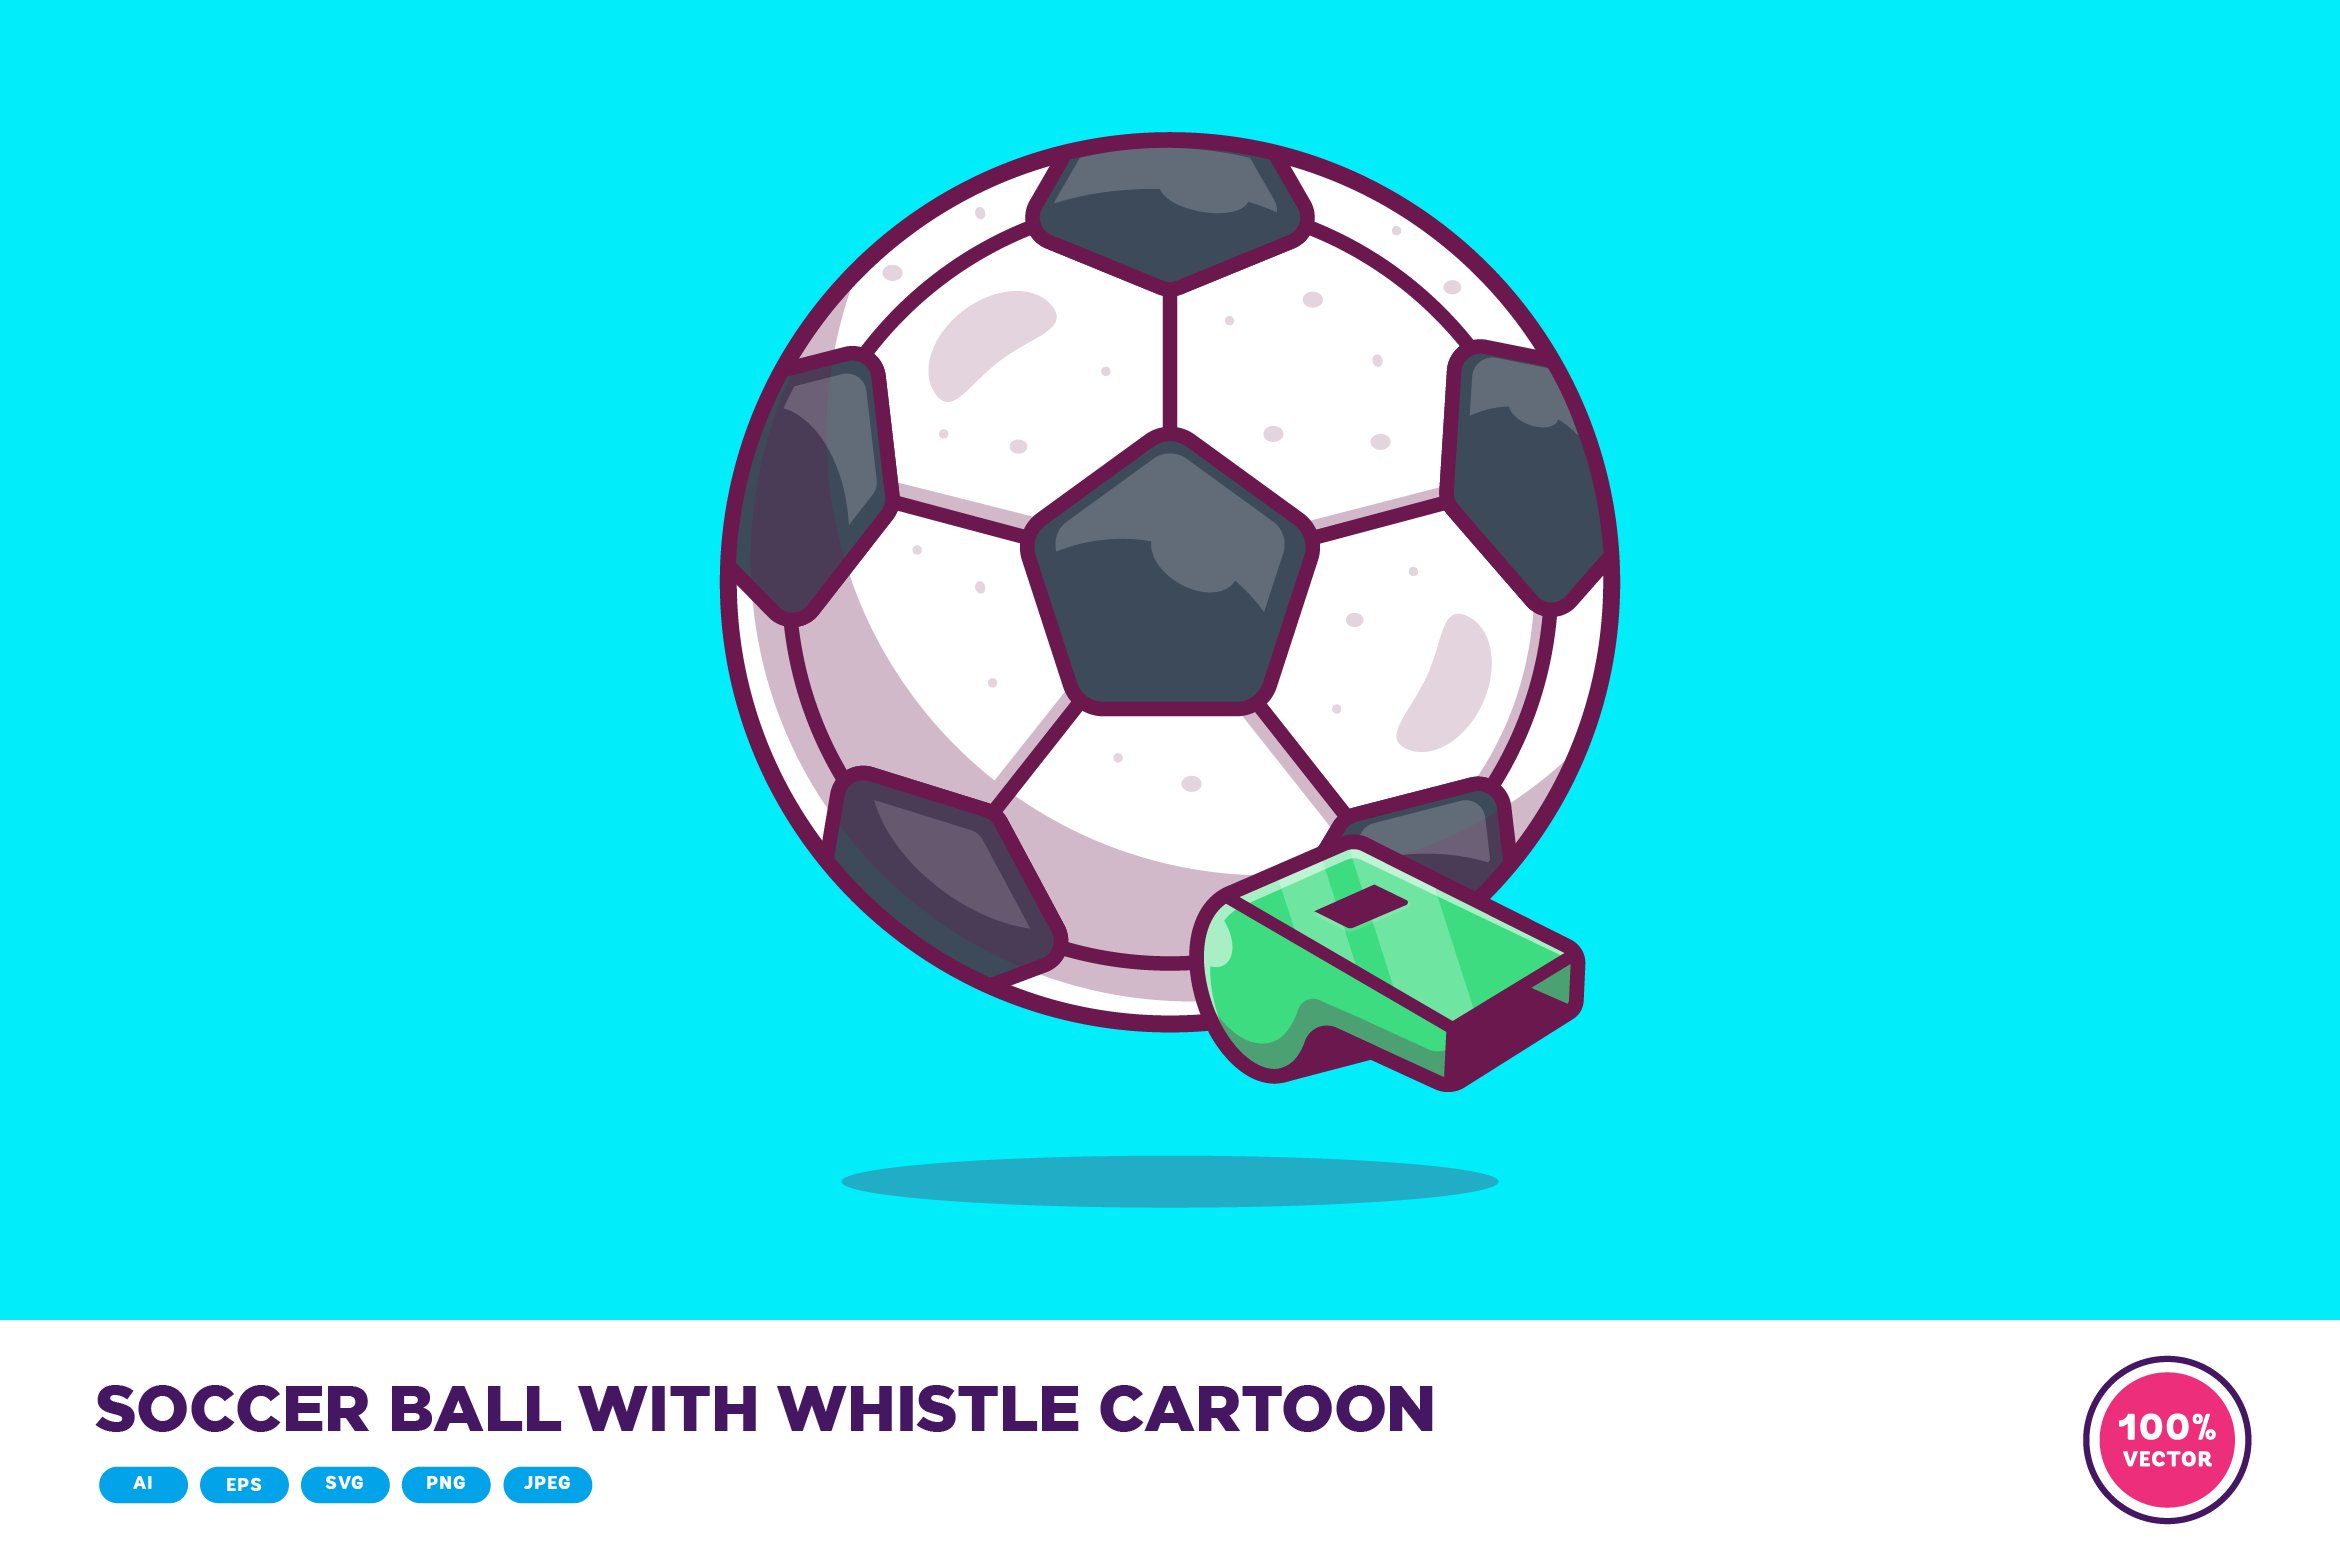 Soccer Ball With Whistle Cartoon cover image.